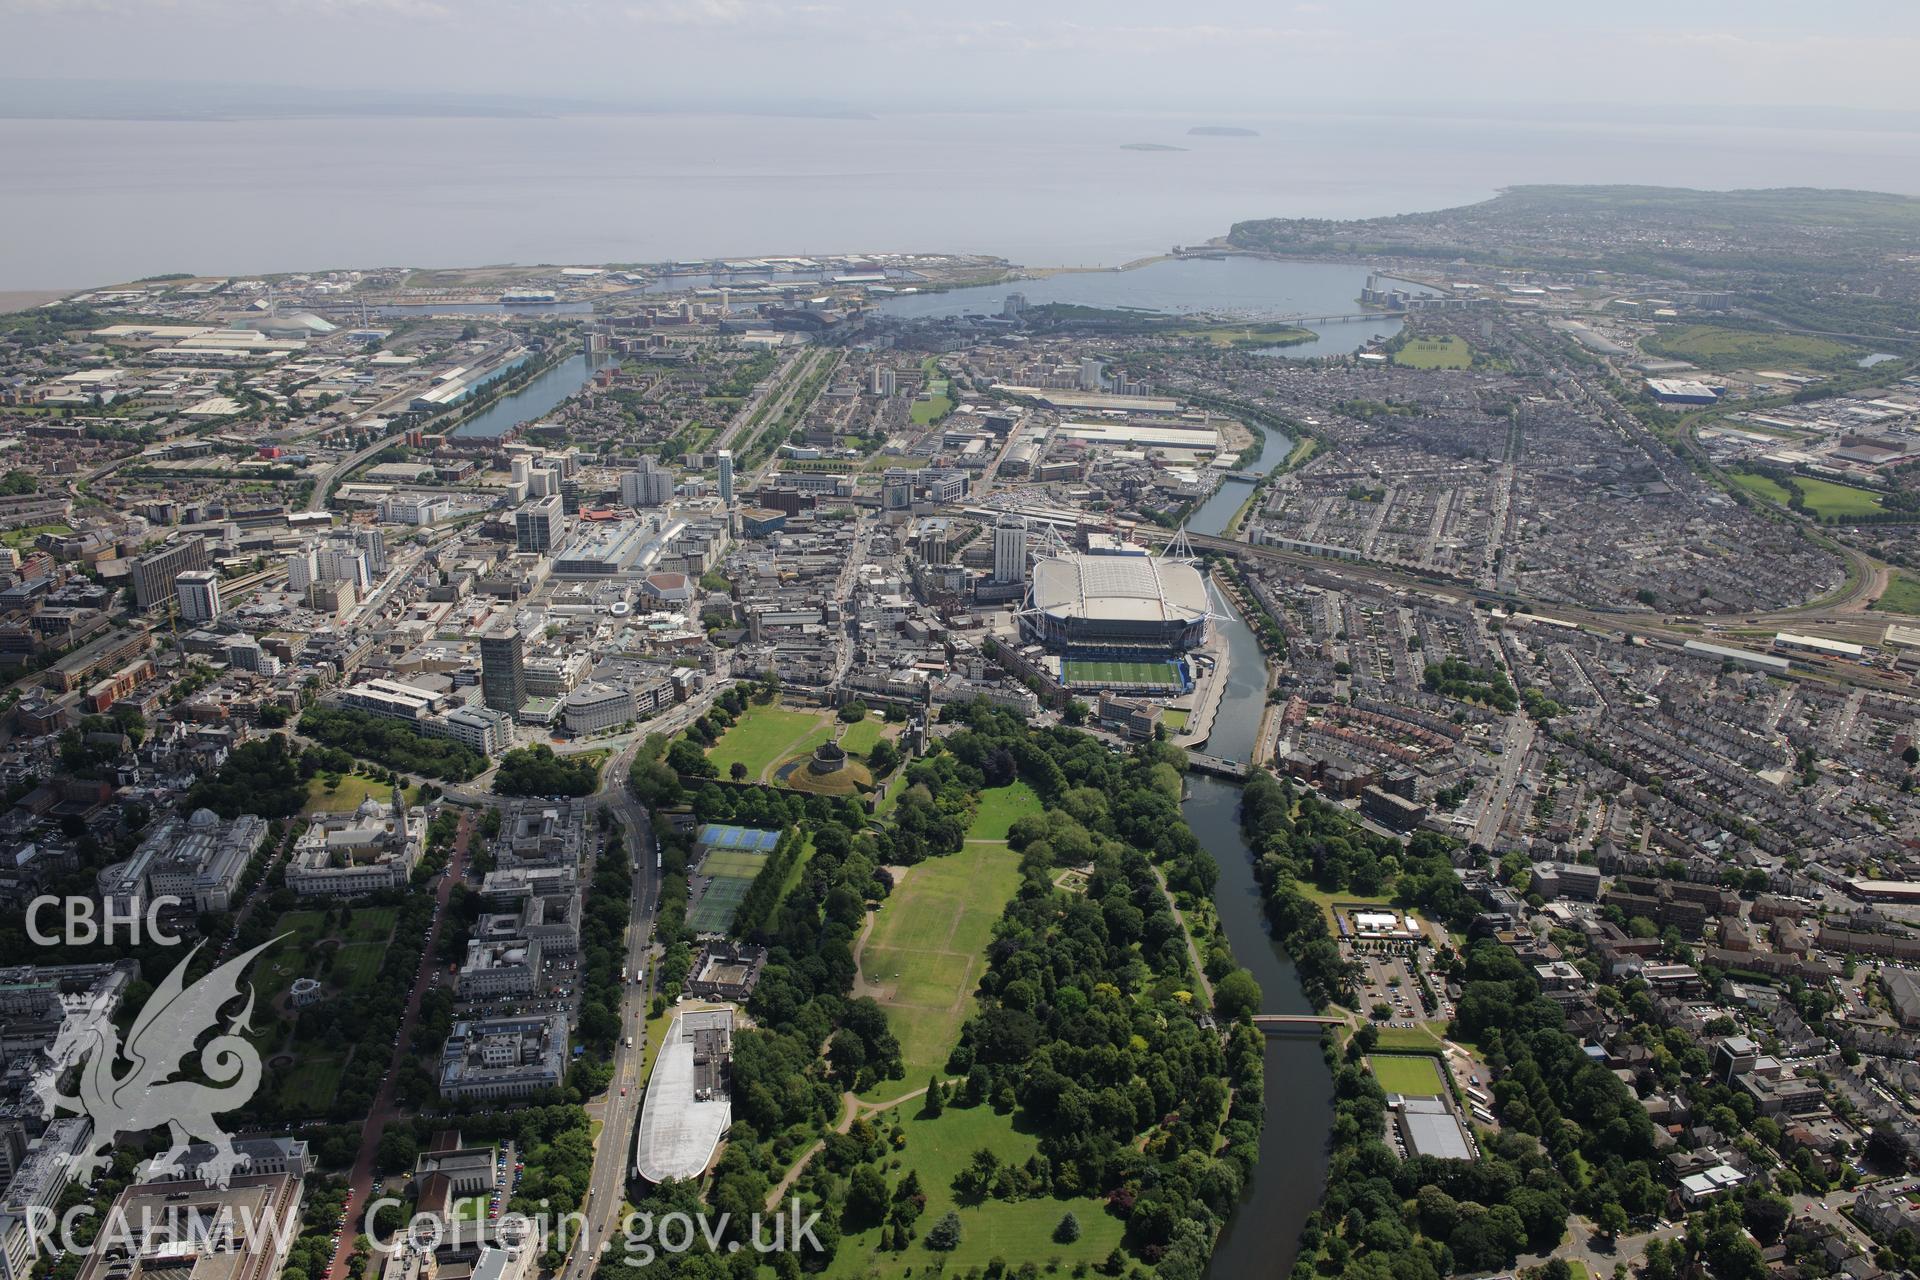 Views of Cardiff including the Bay, Millennium Stadium, Castle and grounds and Welsh College of Music and Drama. Oblique aerial photograph taken during the Royal Commission's programme of archaeological aerial reconnaissance by Toby Driver on 29/6/2015.